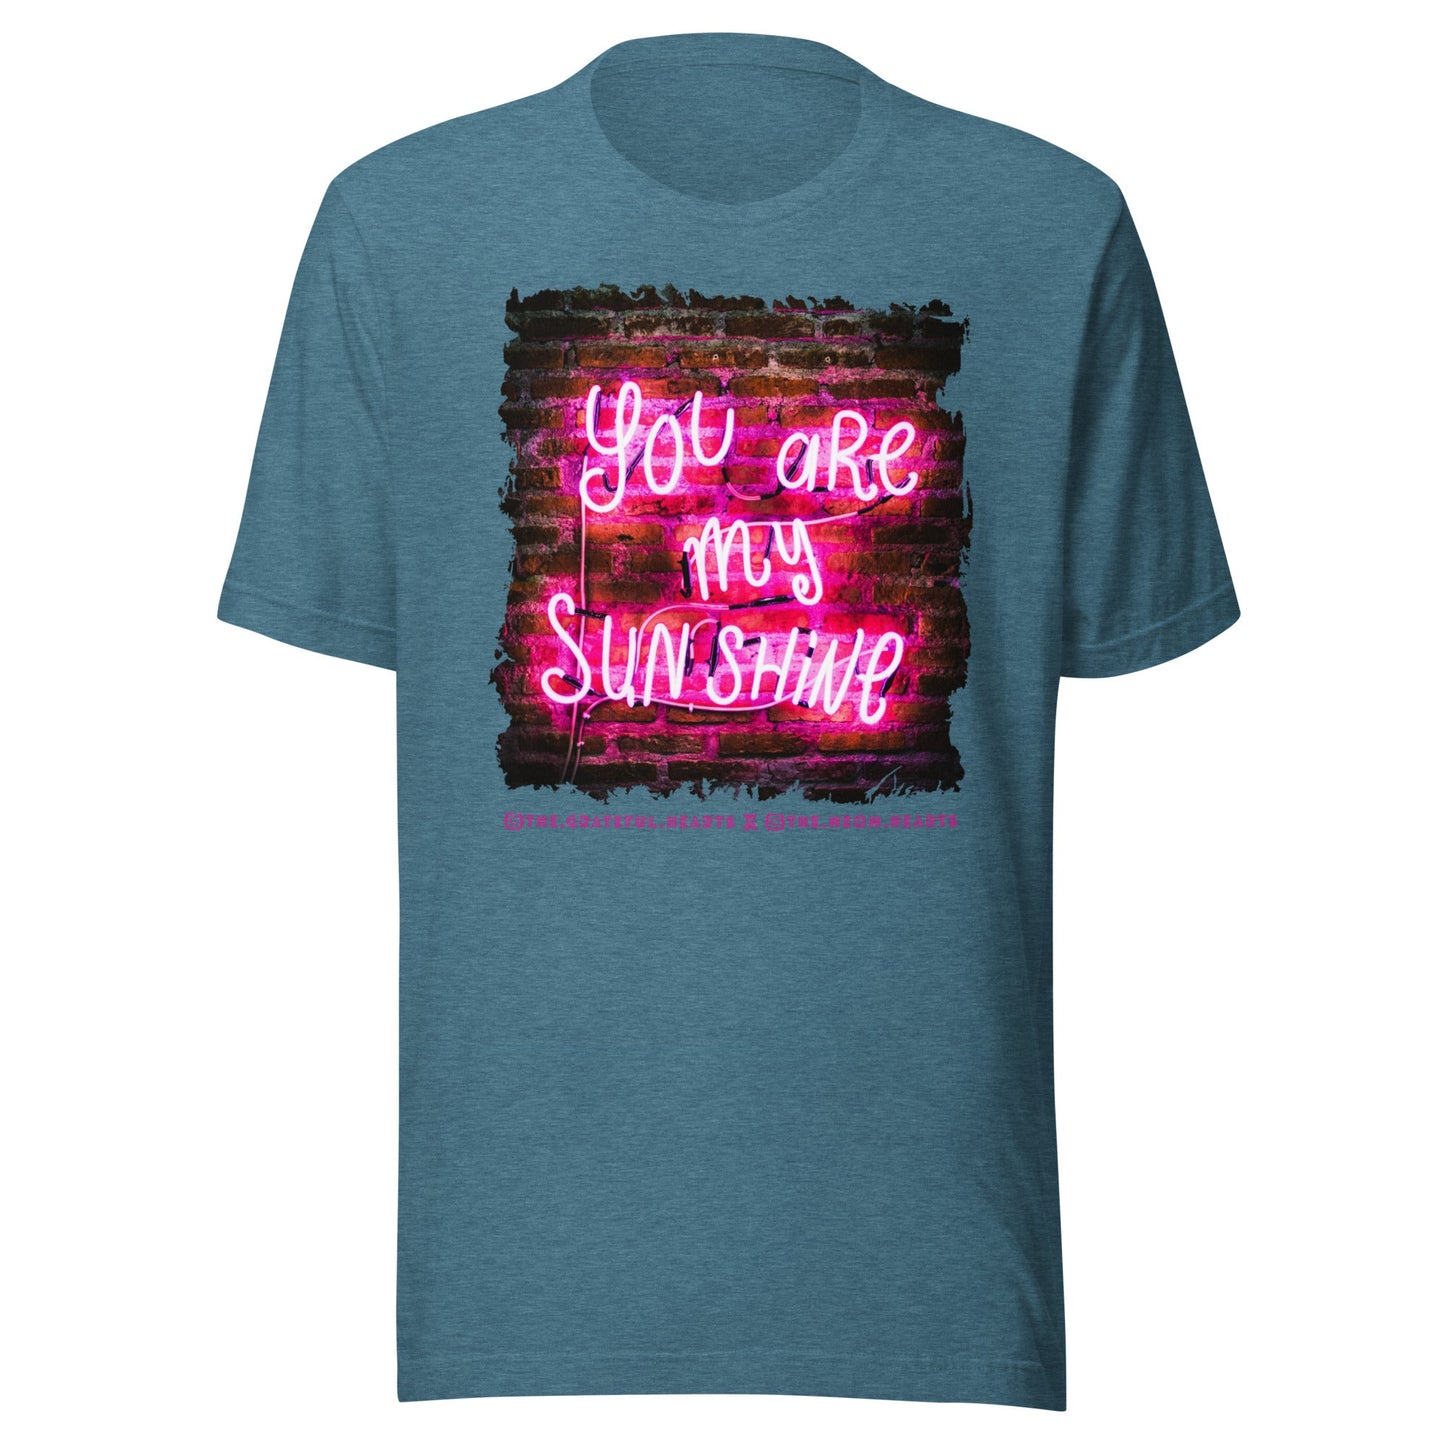 You Are My Sunshine ❤️ - Unisex Crew Neck t-shirt (Available in Various Colors 💖💙💜) - The Grateful Hearts